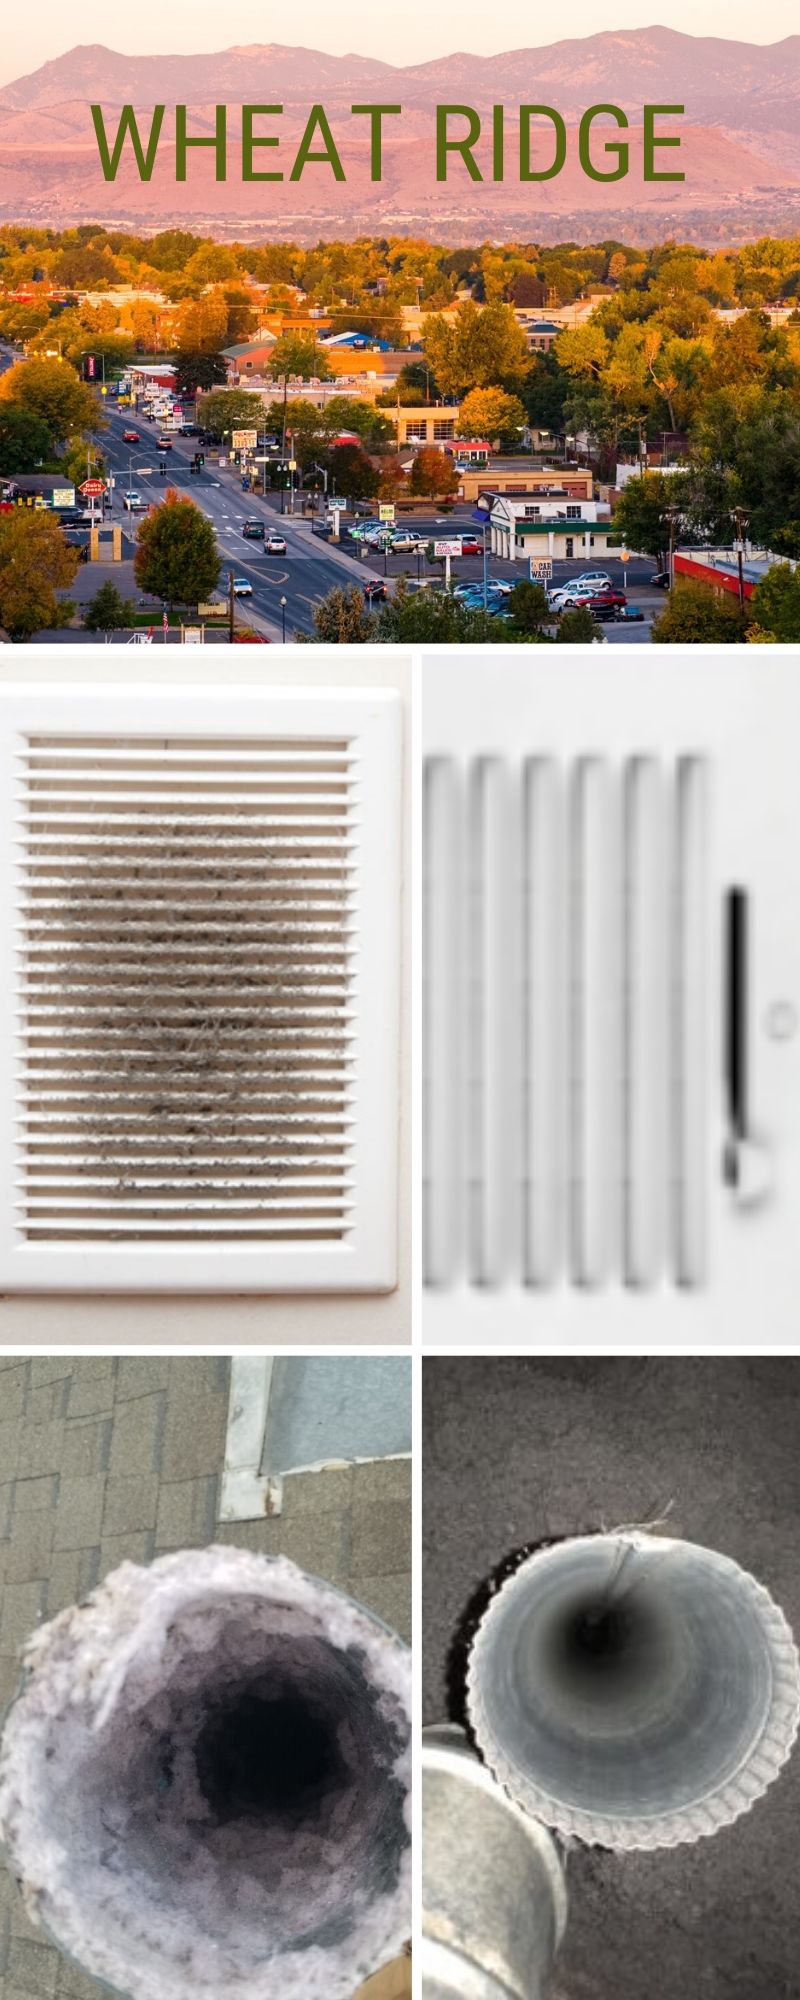 Infographic Air Duct and Dryer Vent Cleaning Wheat Ridge